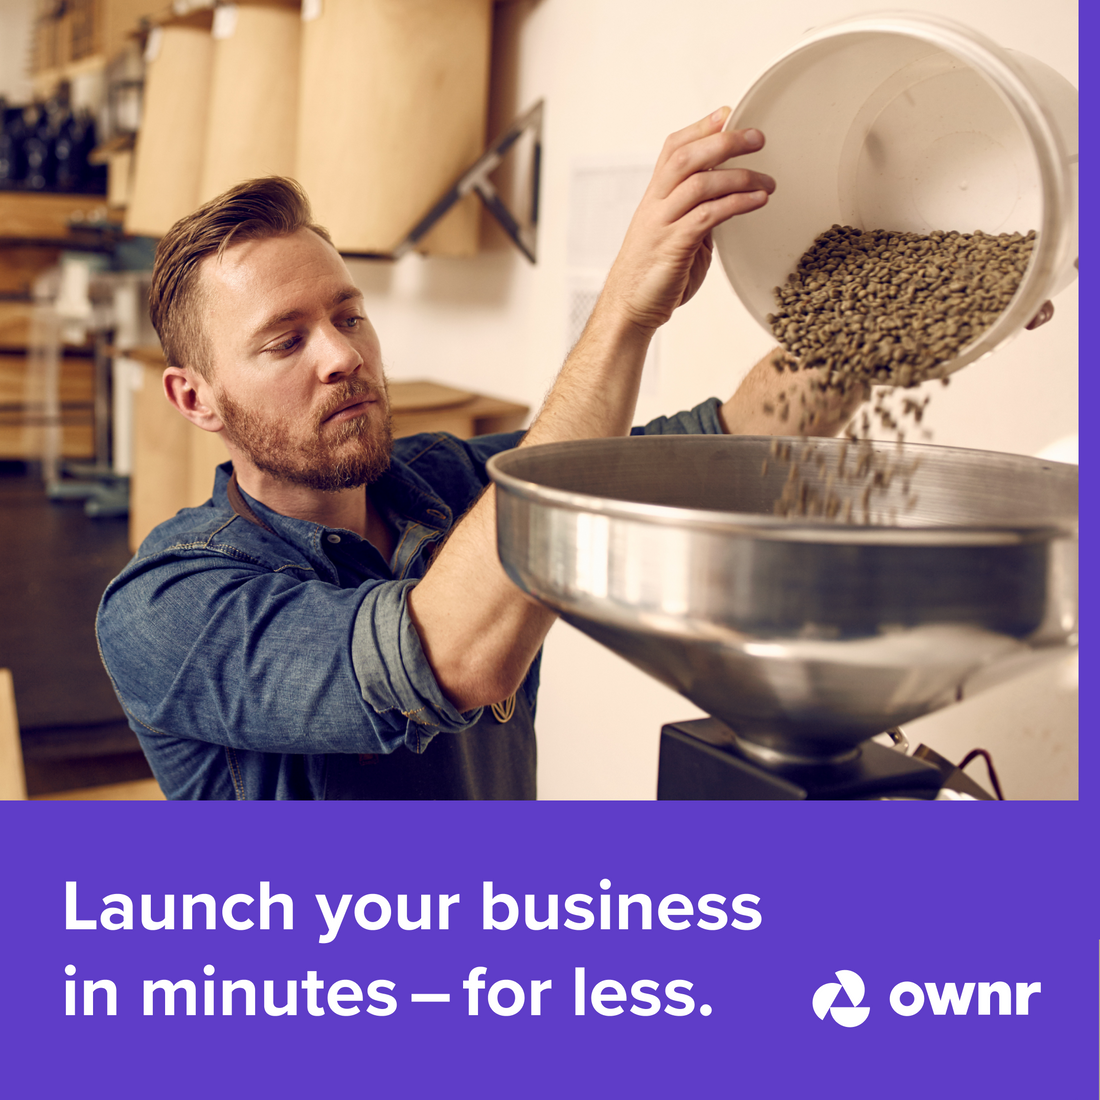 Register your business with Ownr.co